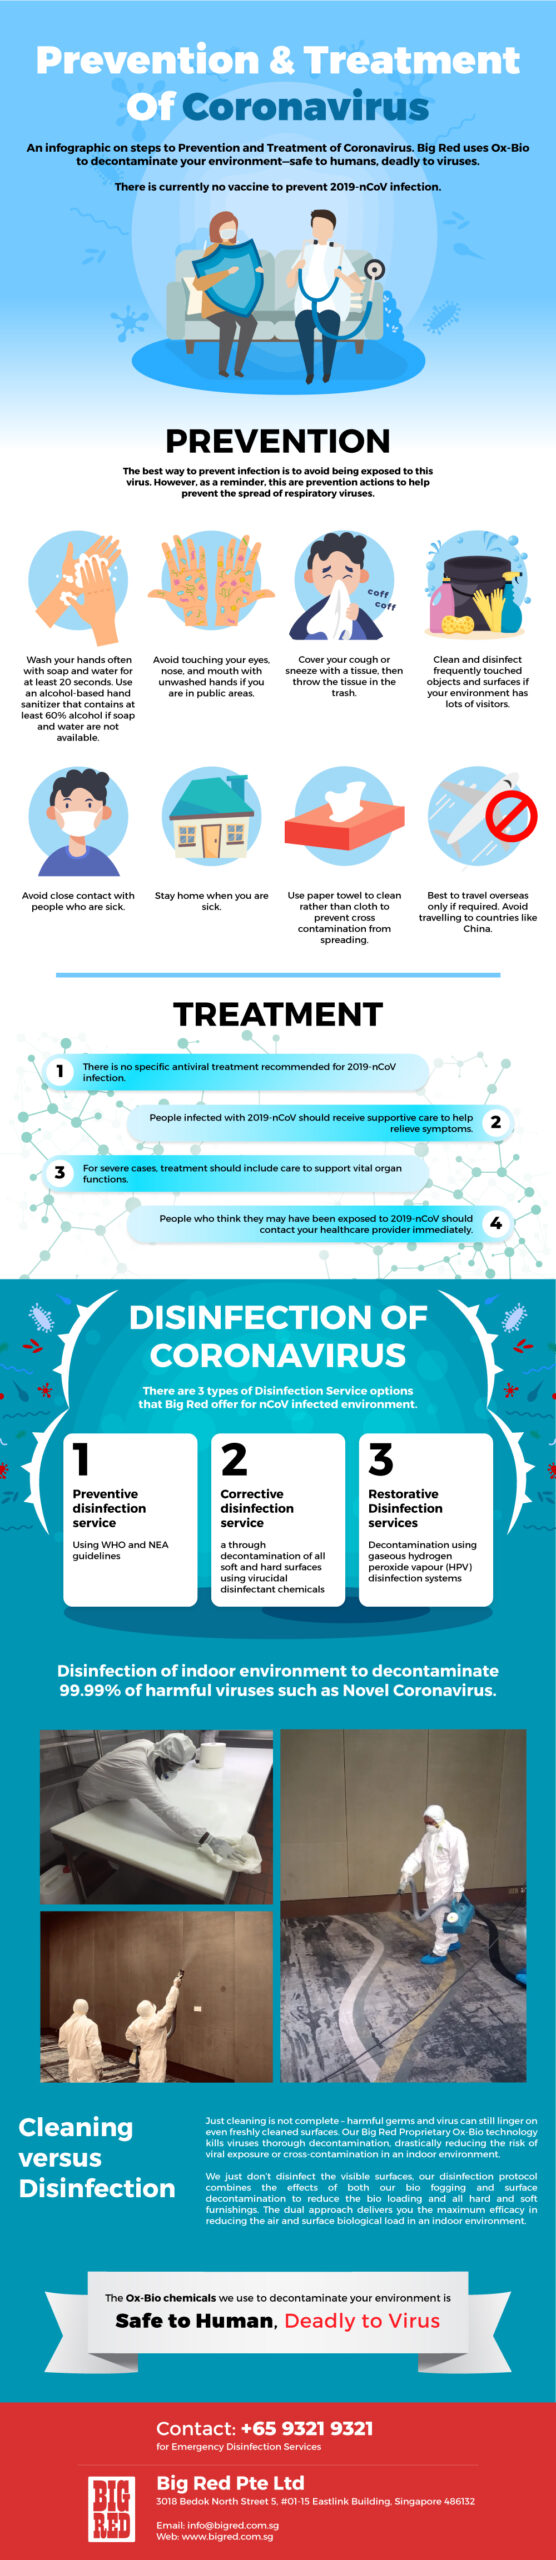 Prevention, Treatment and Disinfection of Coronavirus in Singapore